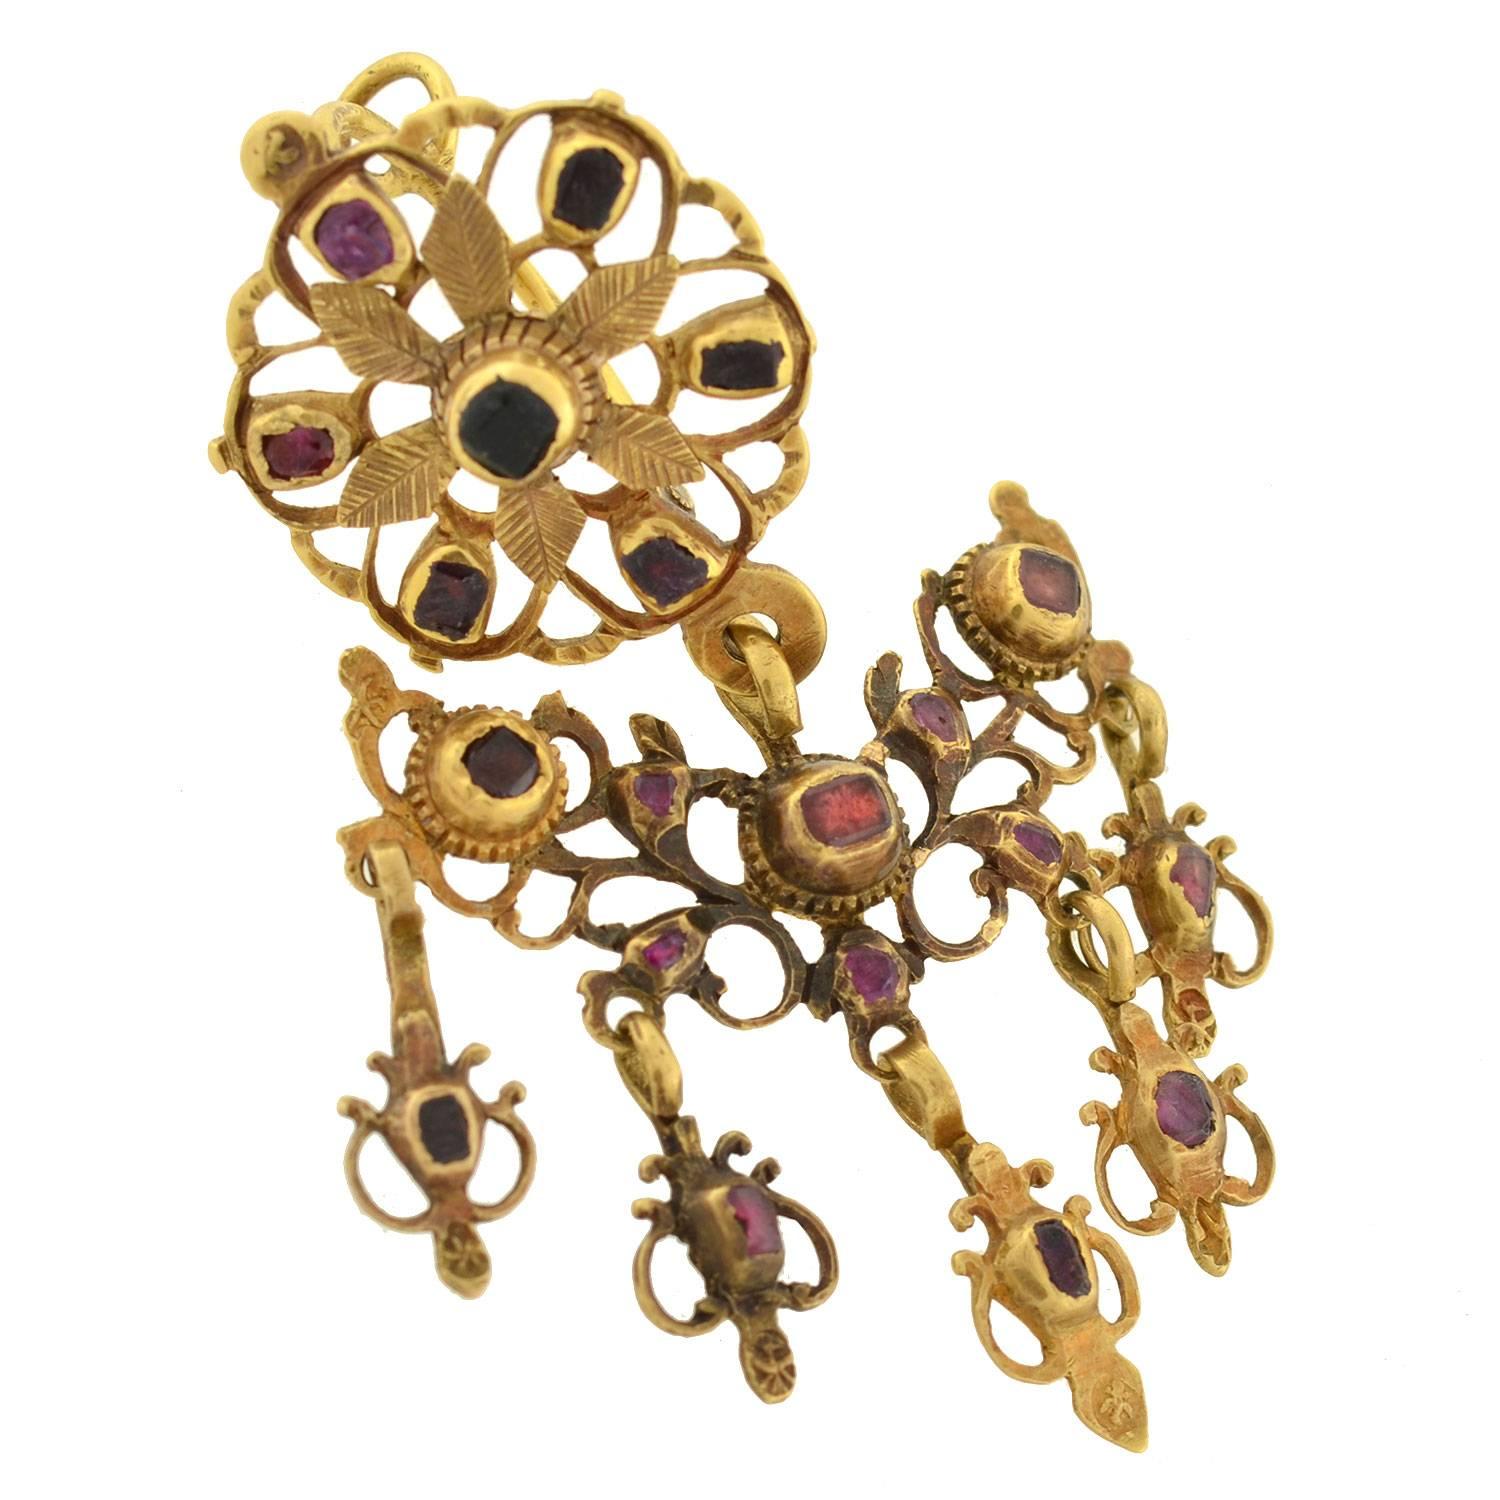 Absolutely exquisite garnet earrings from the Georgian (ca1780) period. These unusual and incredible earrings are particularly large in size and have a magnificent and royal-looking appearance. Each is made of 18kt yellow gold and detailed with 20